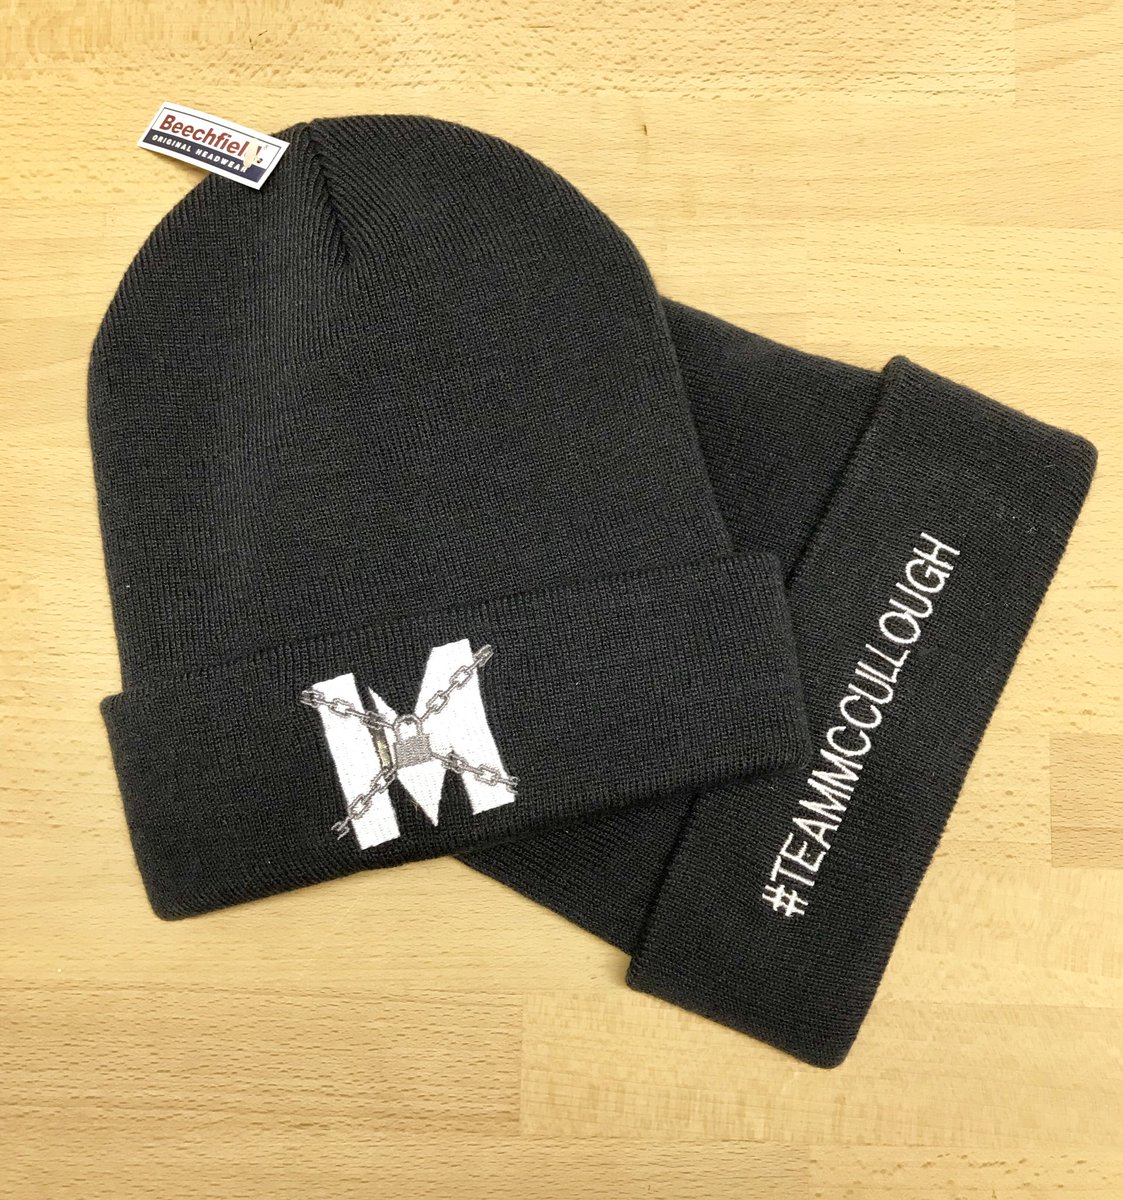 We’ve got two exclusive #TeamMcCullough beanies up for grabs, RT and follow and we will pick at random this weekend! 👊🏼 @mccullough_marc #SmileTeam #CarrollvMcCullough #FramptonDonaire